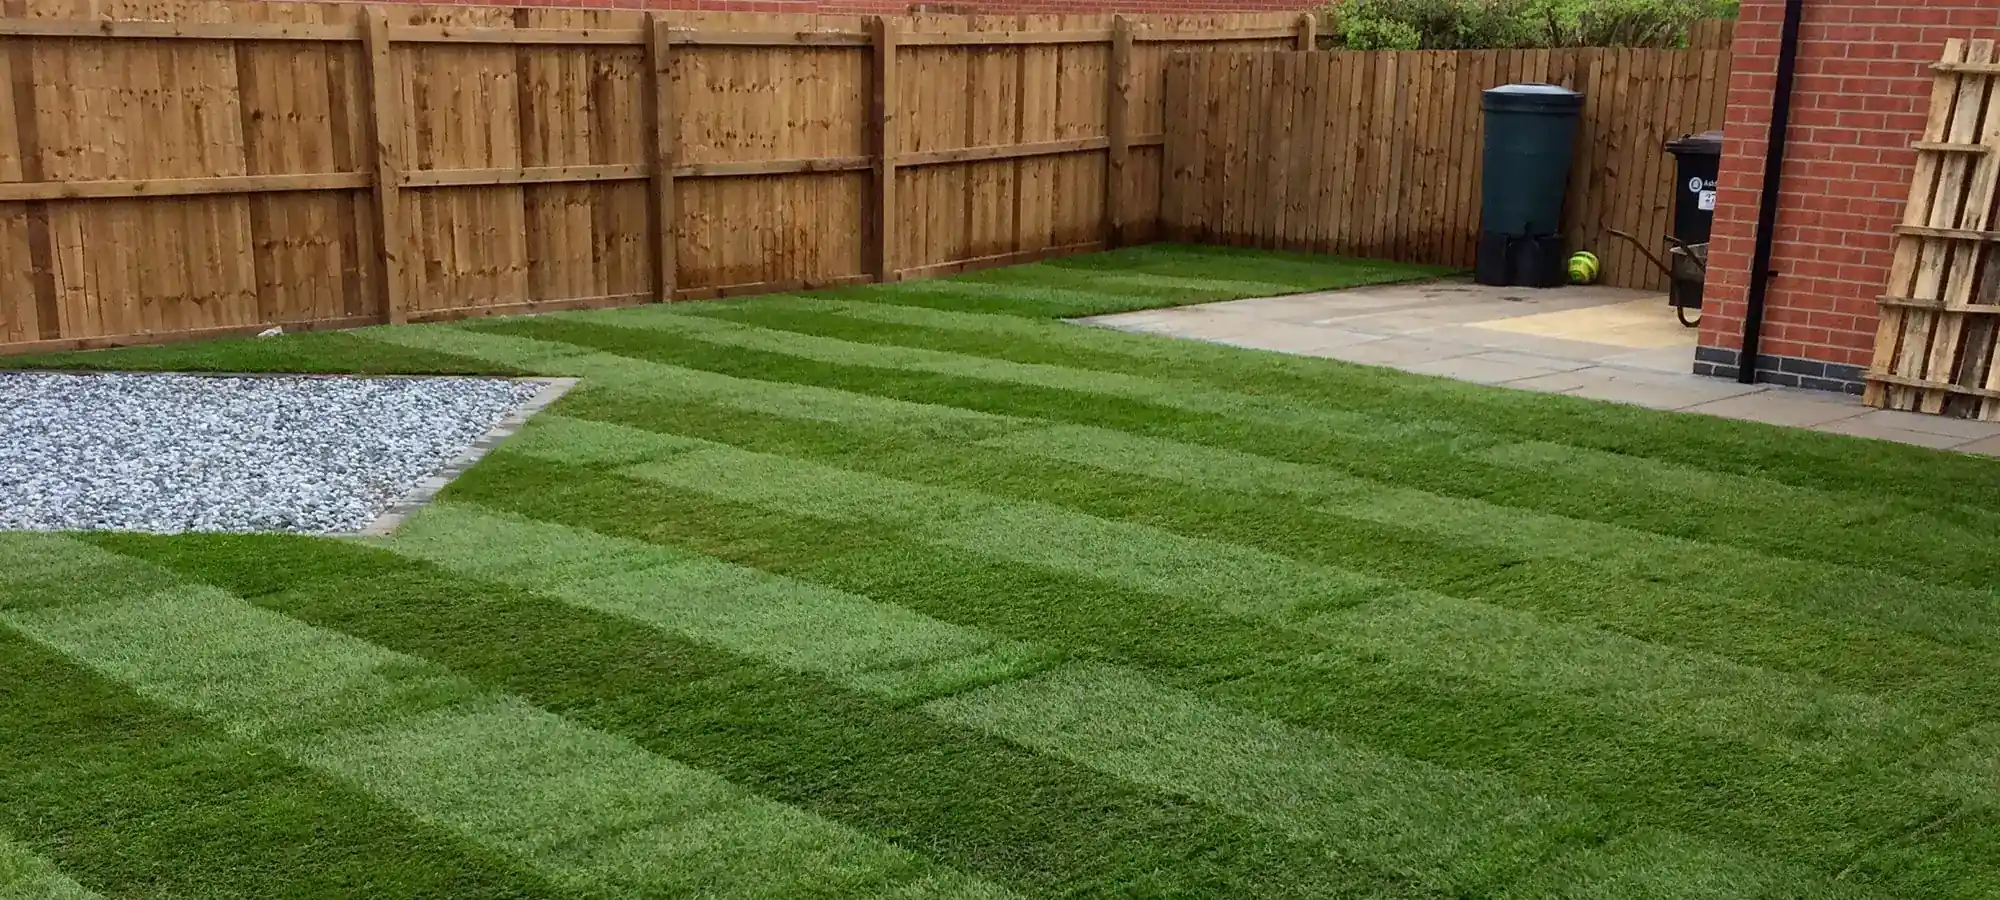 Turf Layers In Nottingham